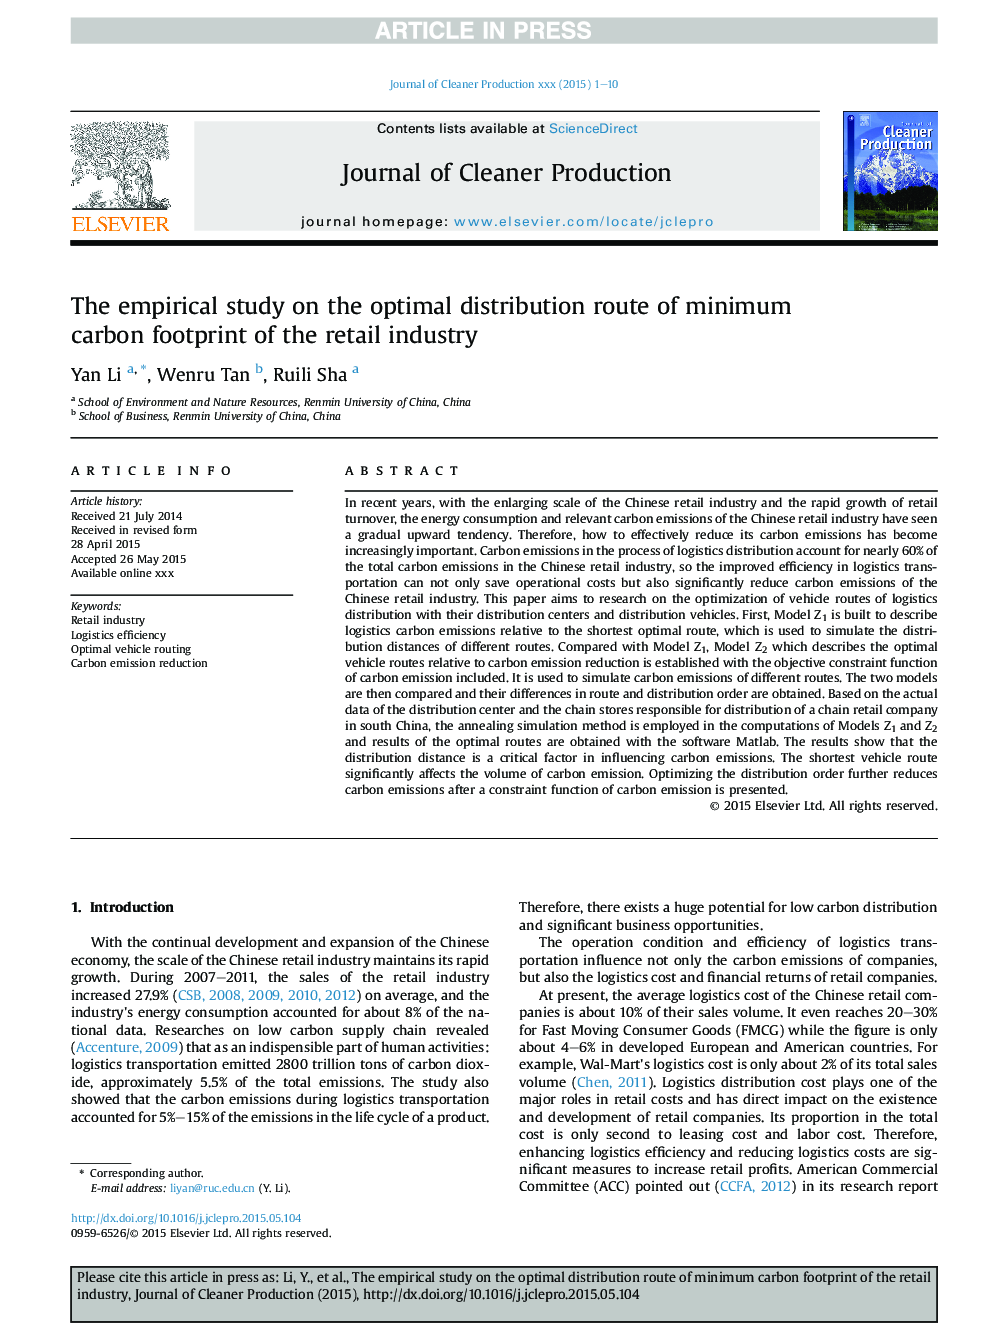 The empirical study on the optimal distribution route of minimum carbon footprint of the retail industry